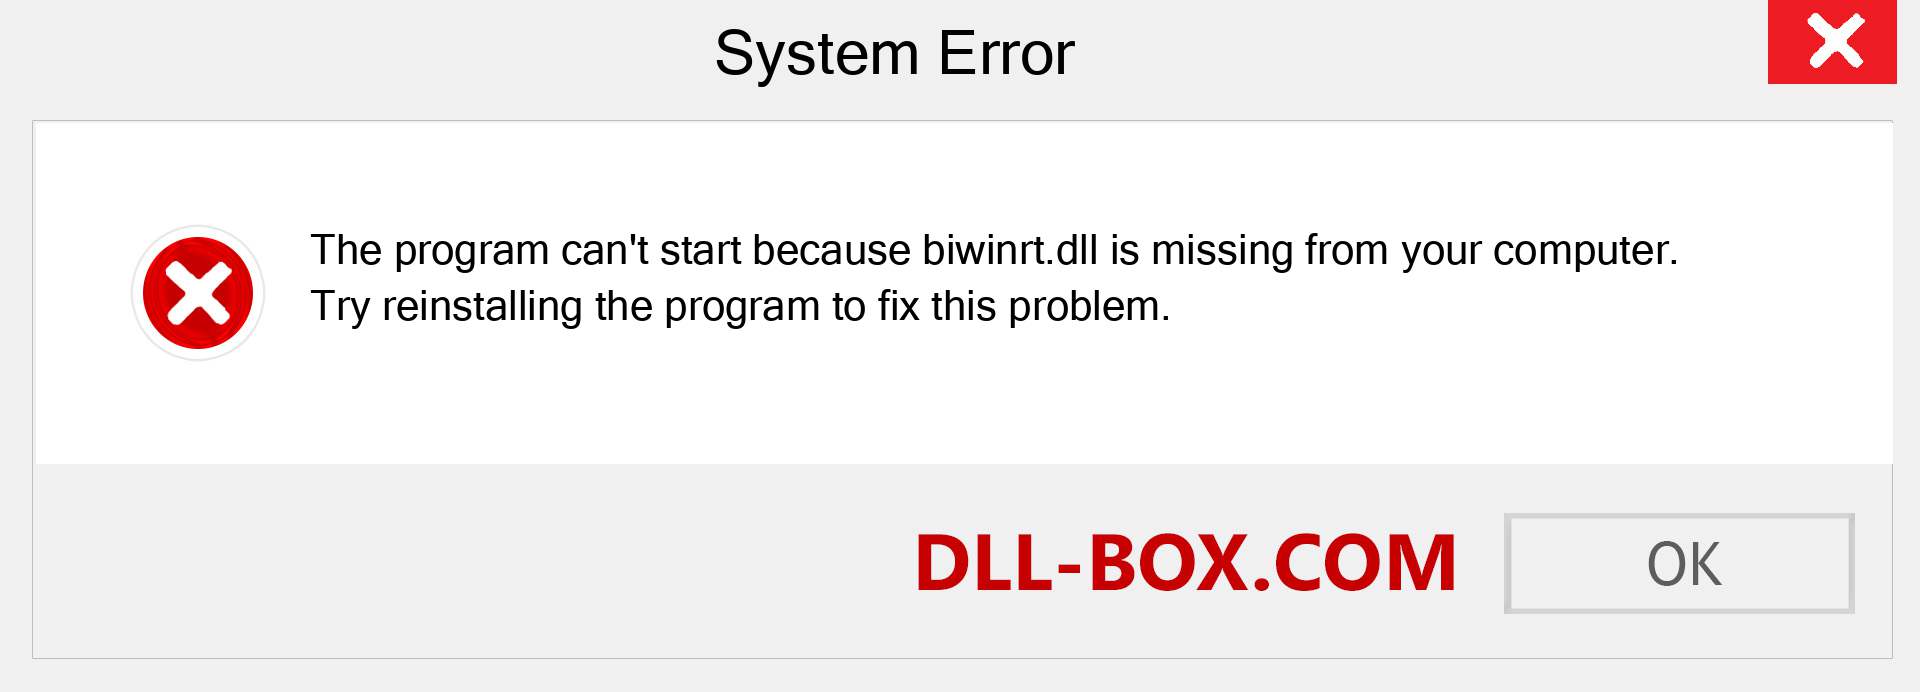  biwinrt.dll file is missing?. Download for Windows 7, 8, 10 - Fix  biwinrt dll Missing Error on Windows, photos, images